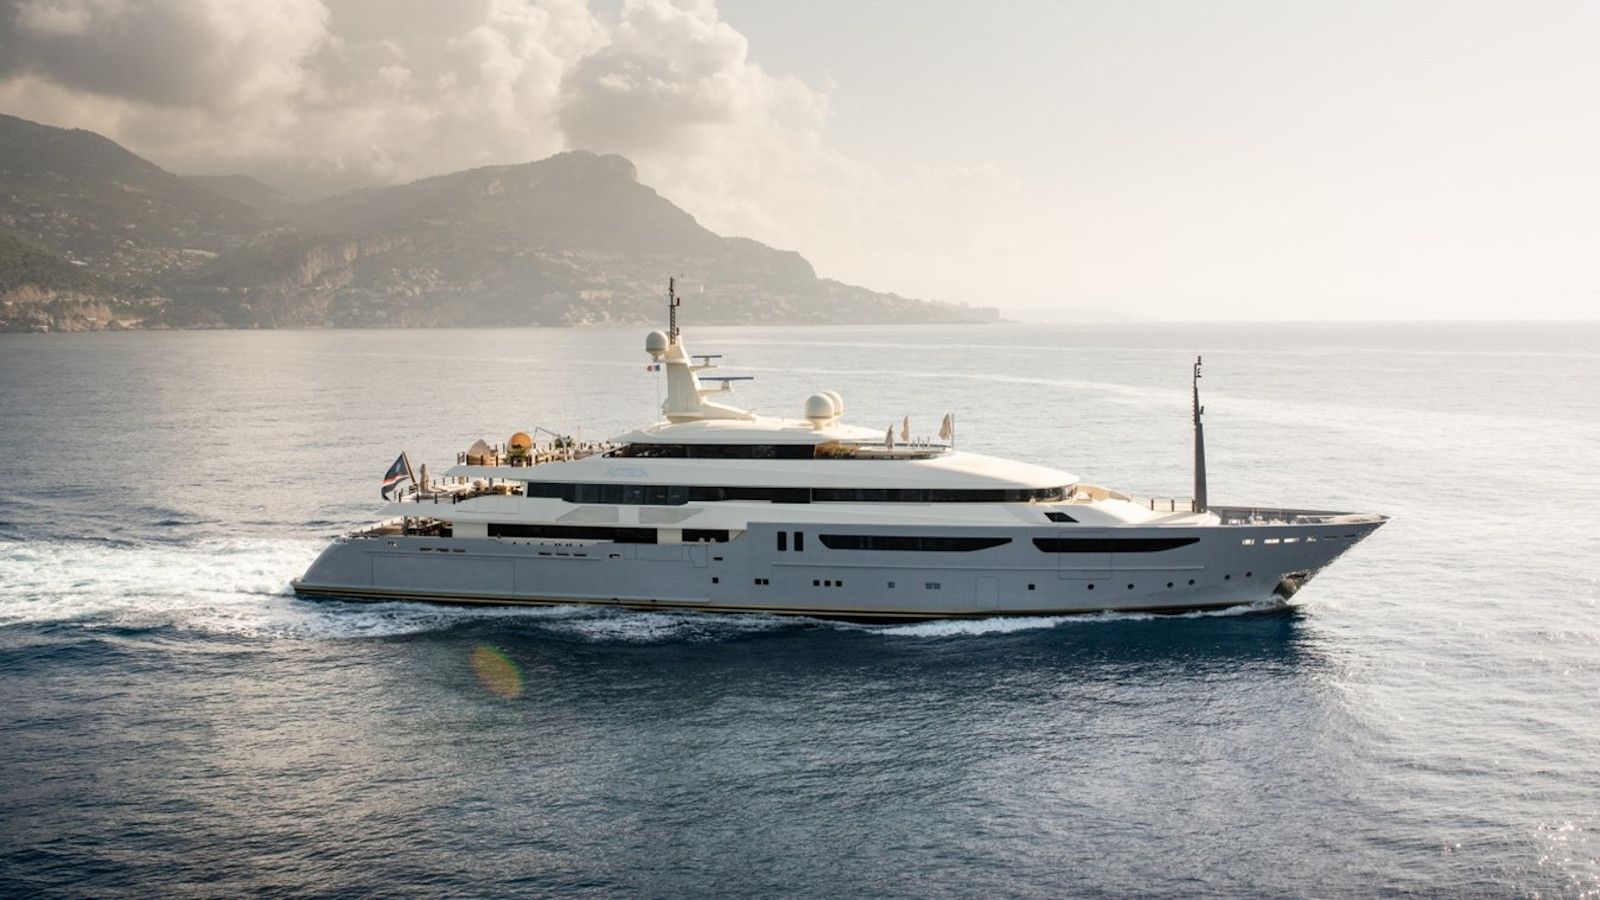 $75 Million Super Yacht Offered In Bitcoin-Only Sale